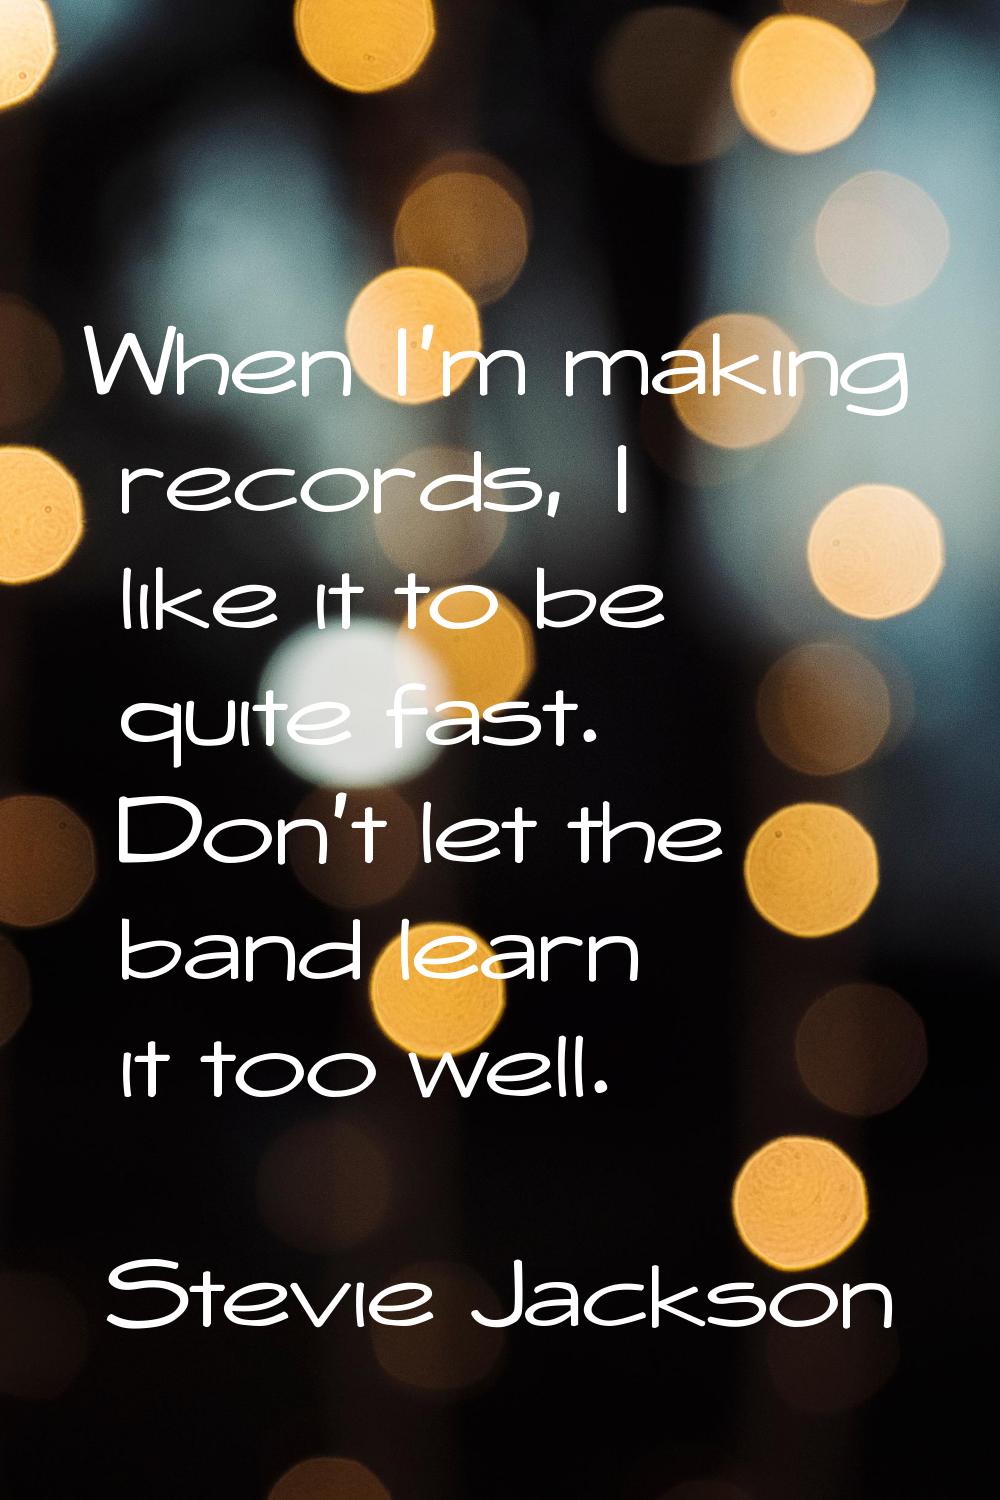 When I'm making records, I like it to be quite fast. Don't let the band learn it too well.